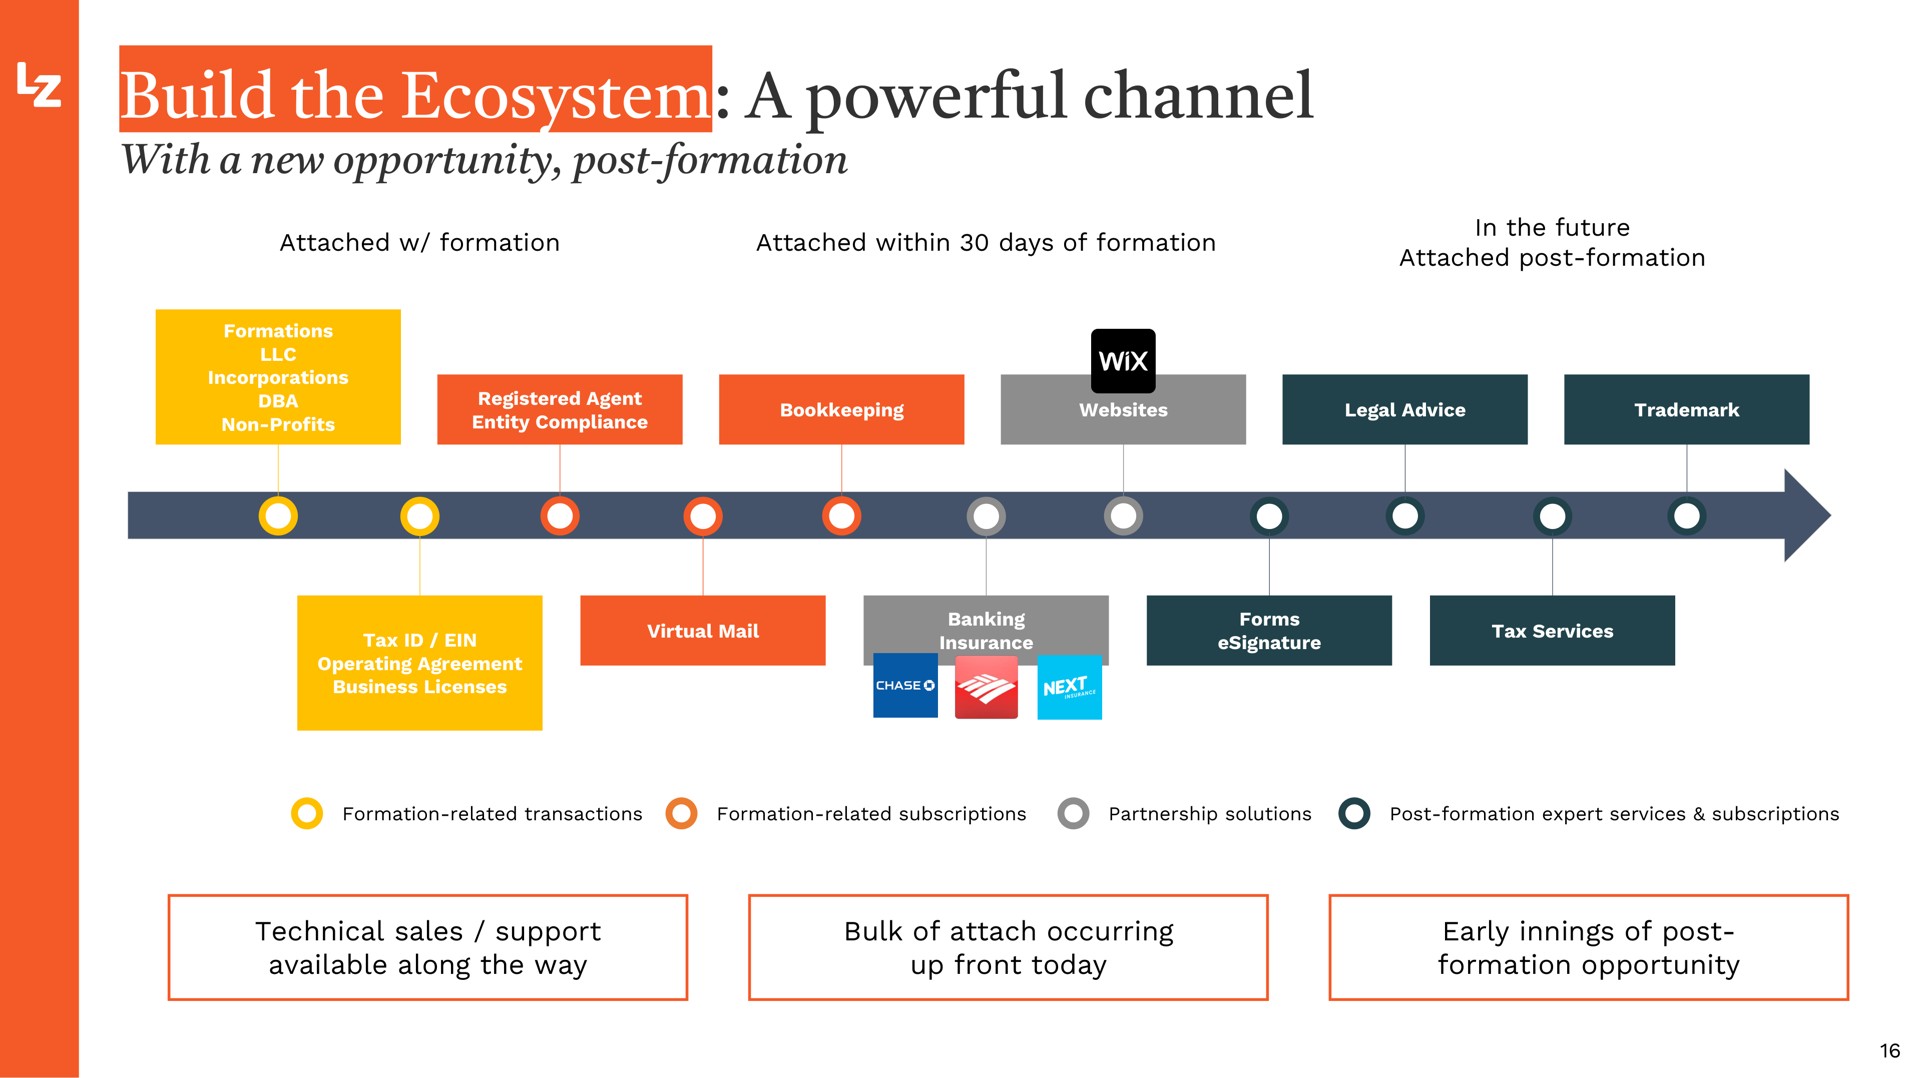 build the ecosystem a powerful channel me | LegalZoom.com